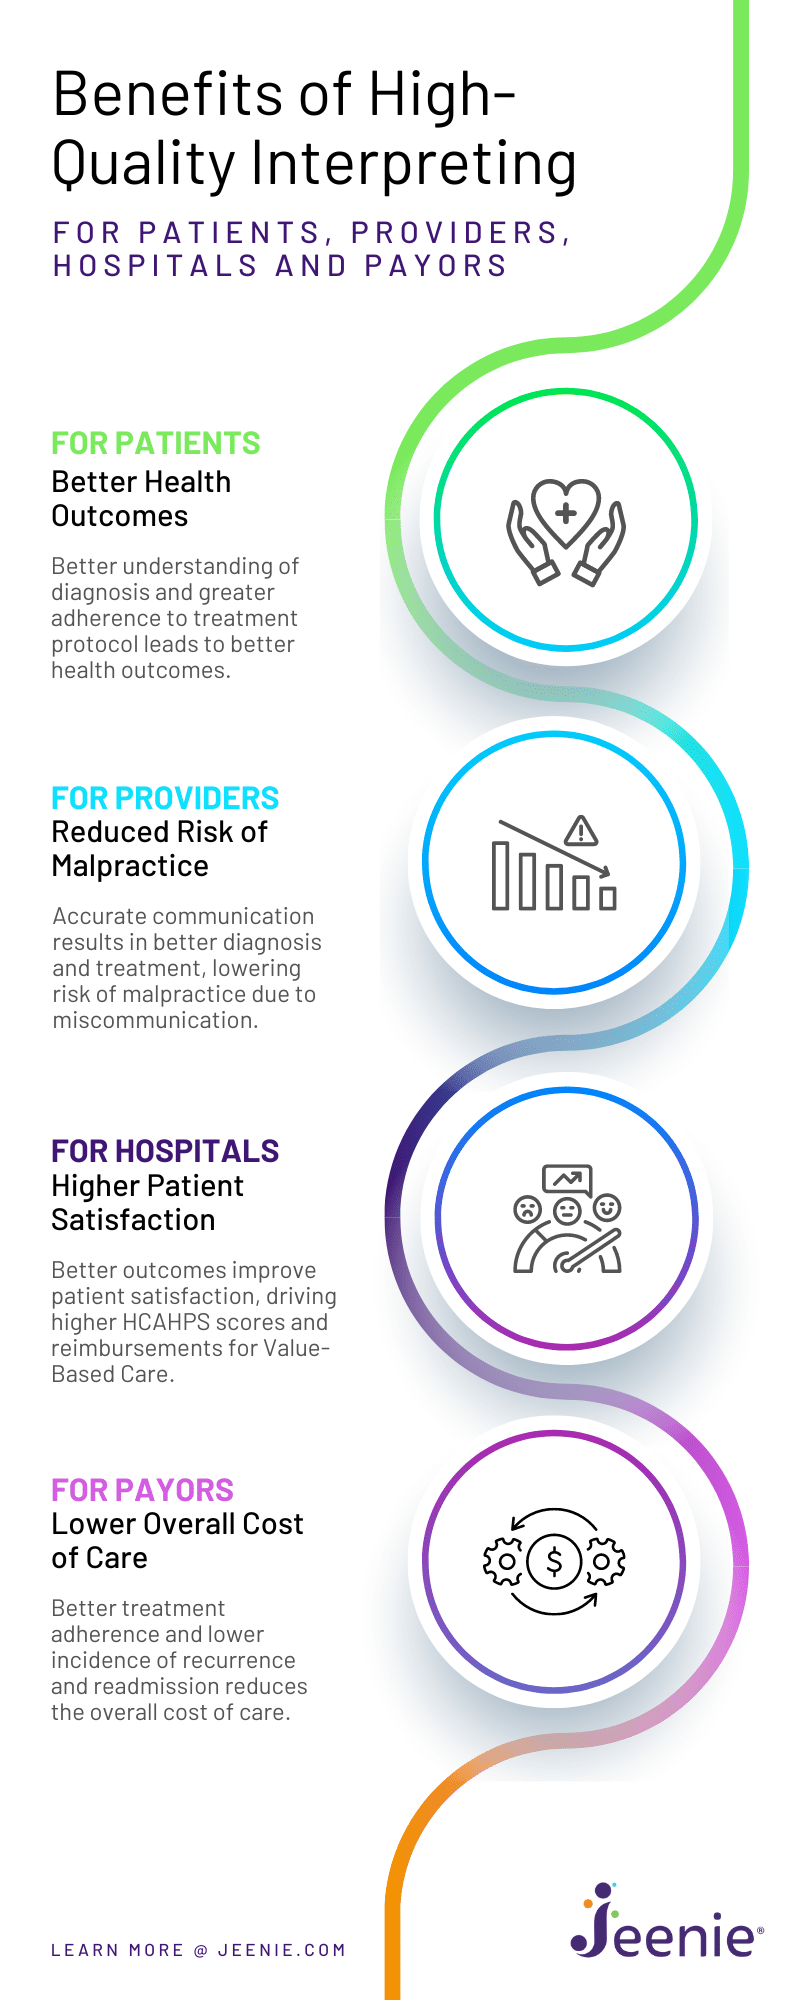 Infographic shows the benefits of high quality interpreting for patients, healthcare professionals, hospitals, and payors.